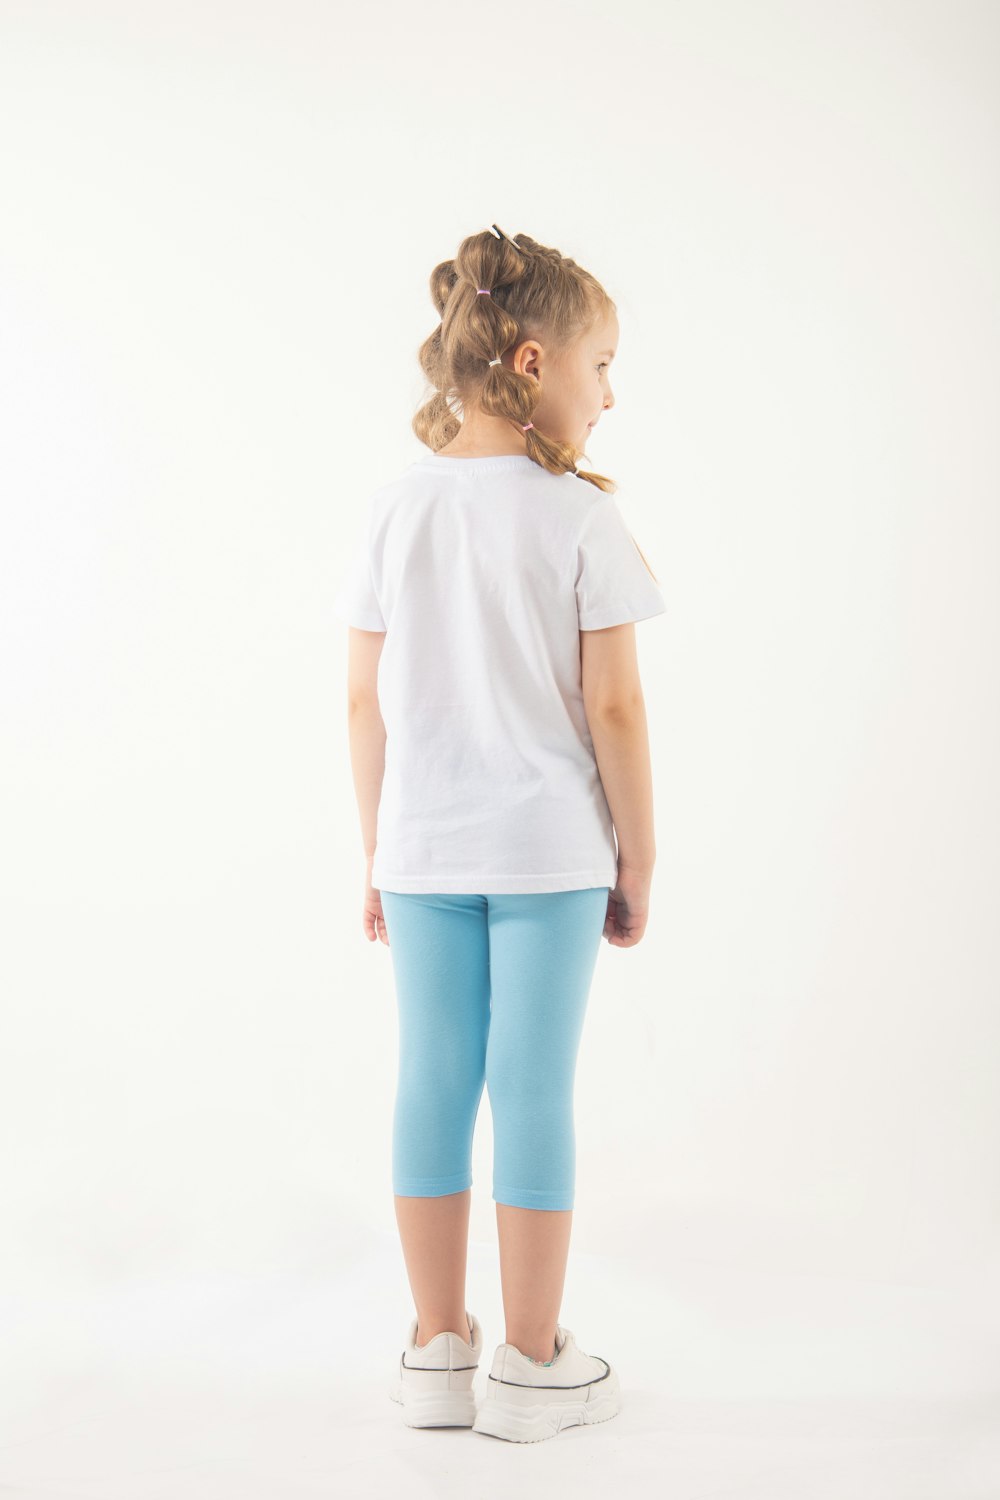 A little girl wearing blue leggings and a white t - shirt photo